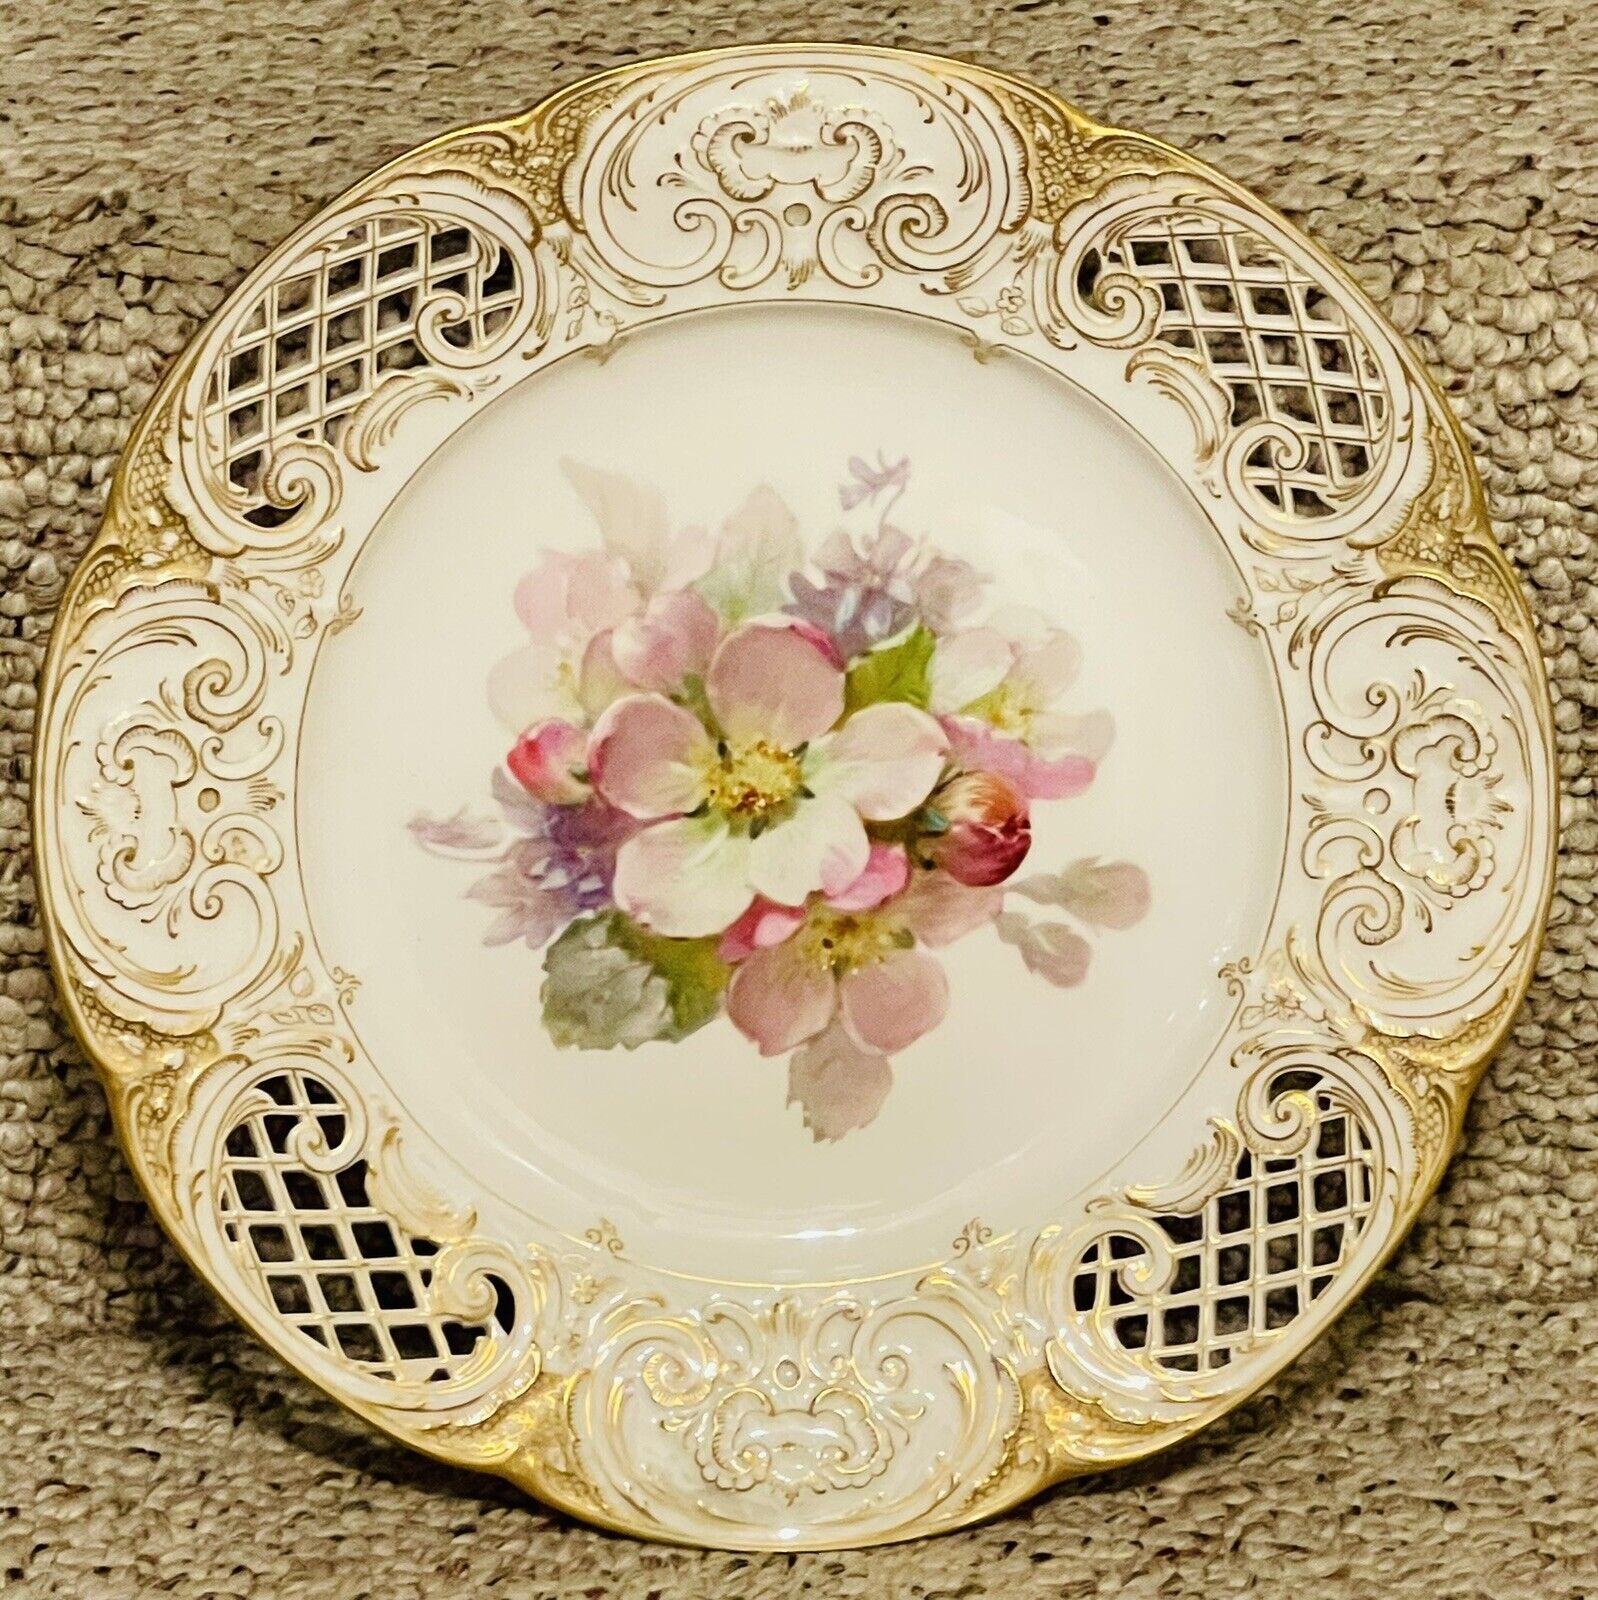 KPM Hand Painted Cabinet Plate with Intricate Pierced Rim with Flowers & Gilded